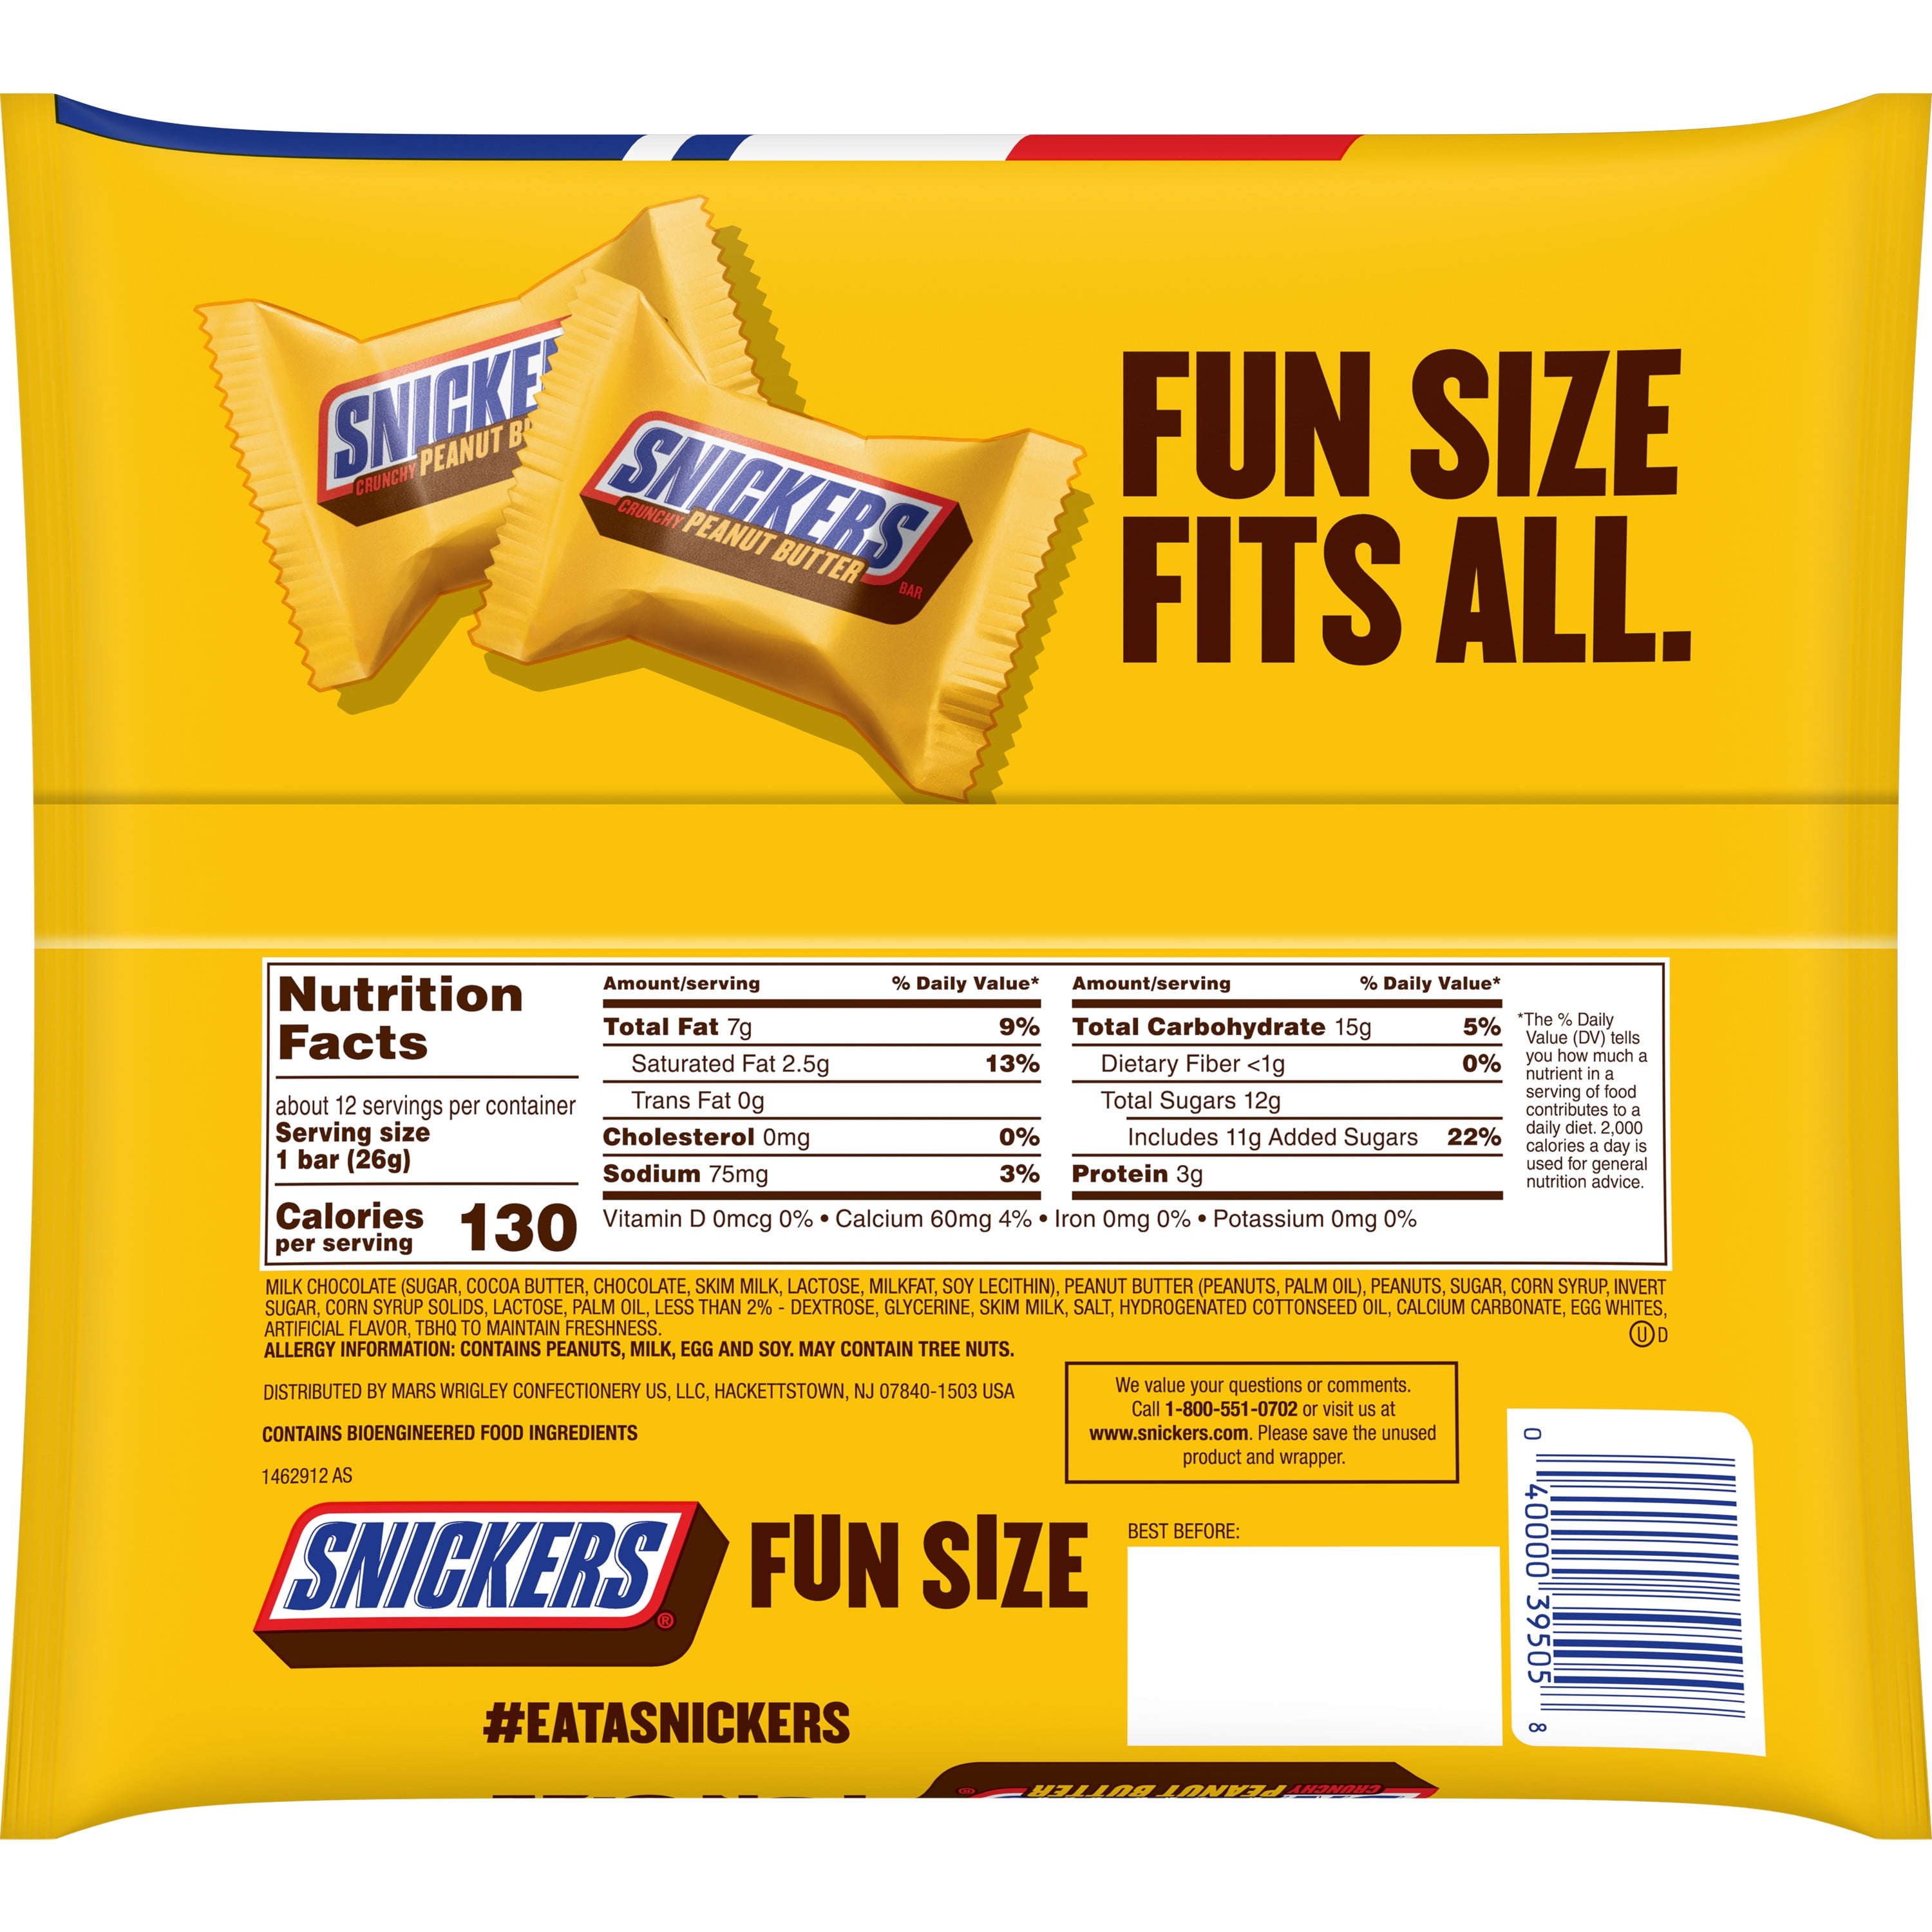 Snickers Peanut Butter Candy Bars Squared, Fun Size Snacks 11.5 oz (326 g)